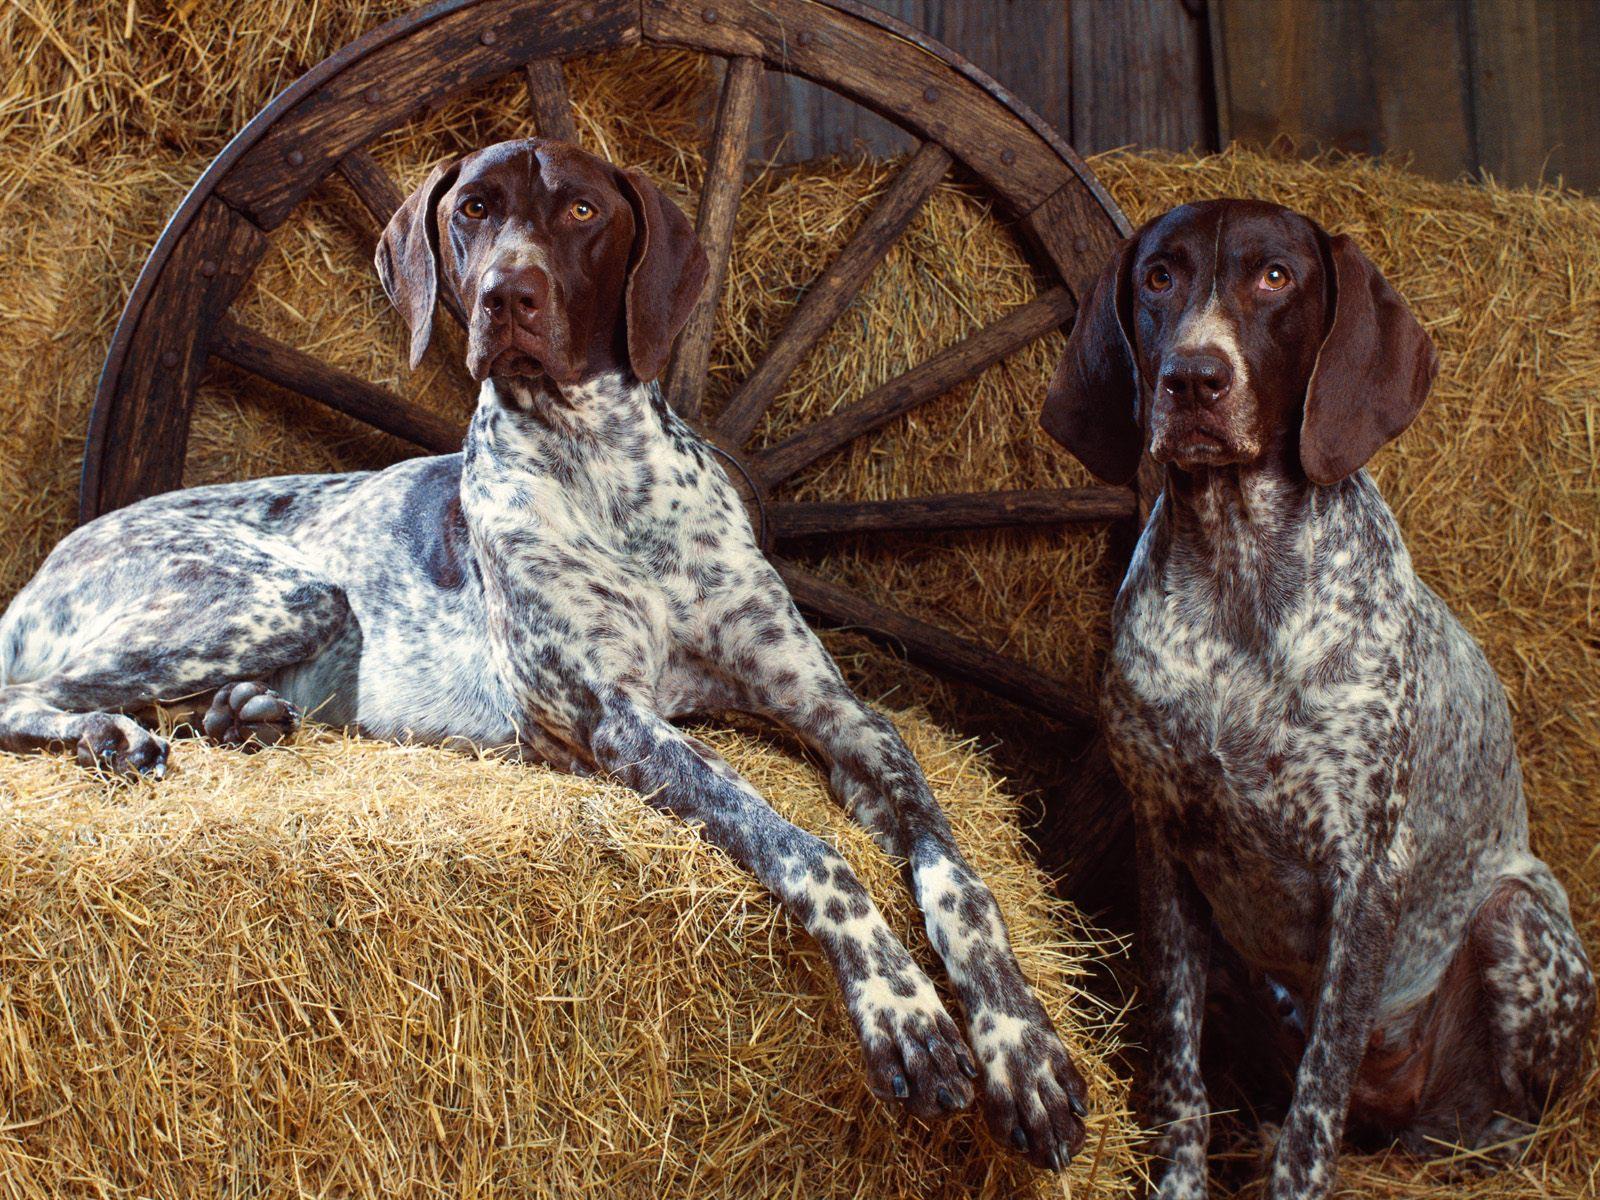 Bluetick Coonhound in the hayloft photo and wallpaper. Beautiful